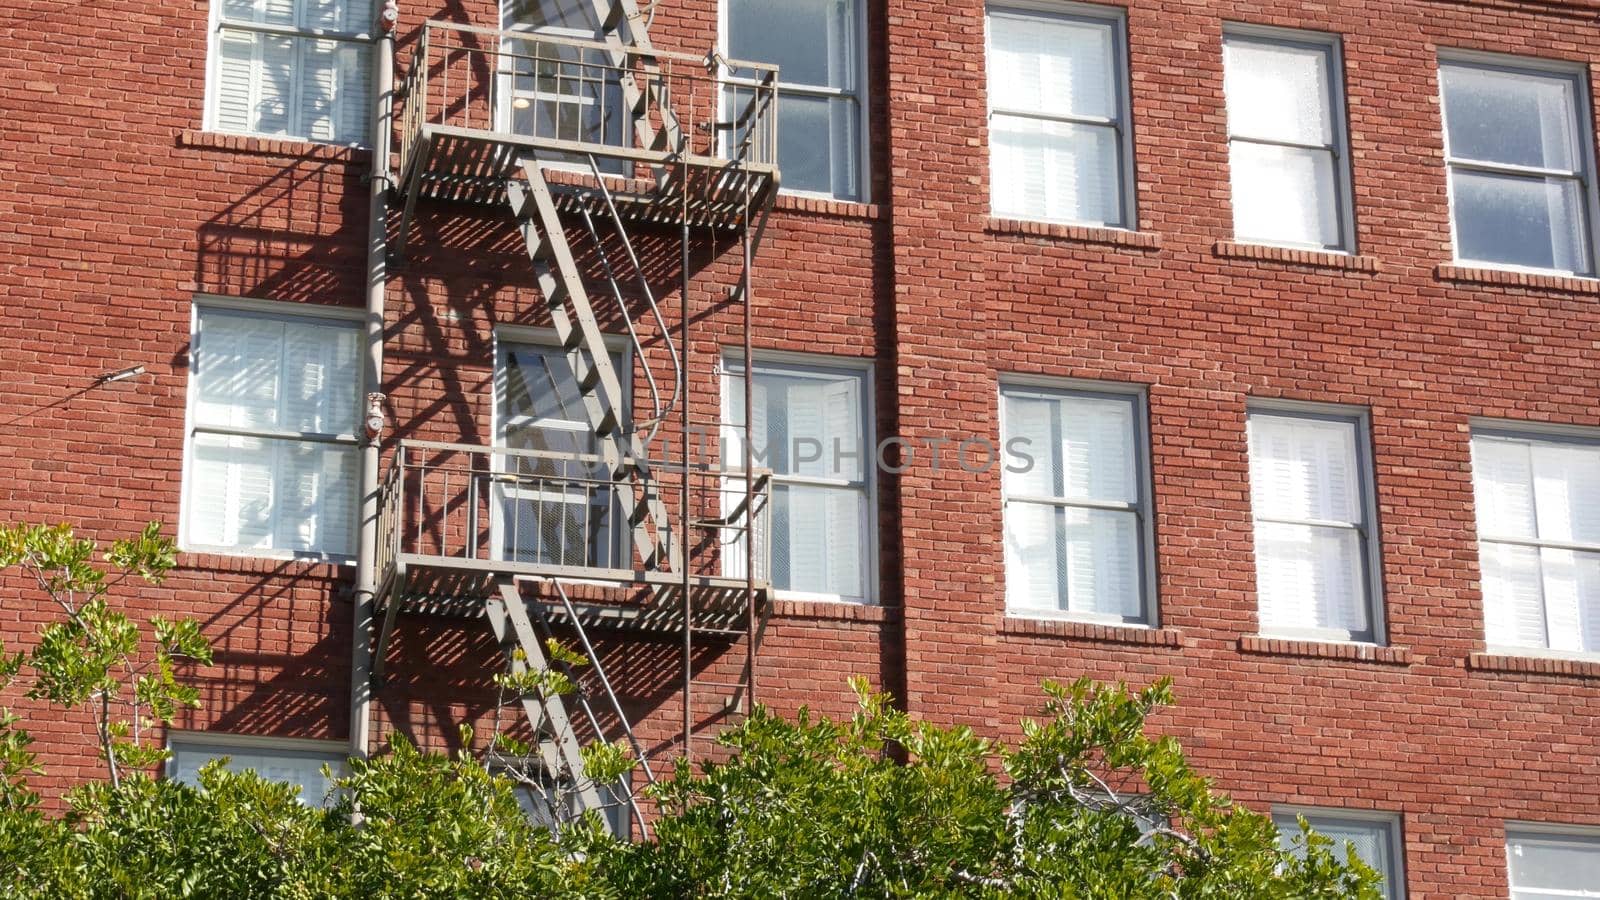 Fire escape ladder outside residential brick building in San Diego city, USA. Typical New York style emergency exit for safe evacuation. Classic retro house exterior as symbol of real estate property by DogoraSun